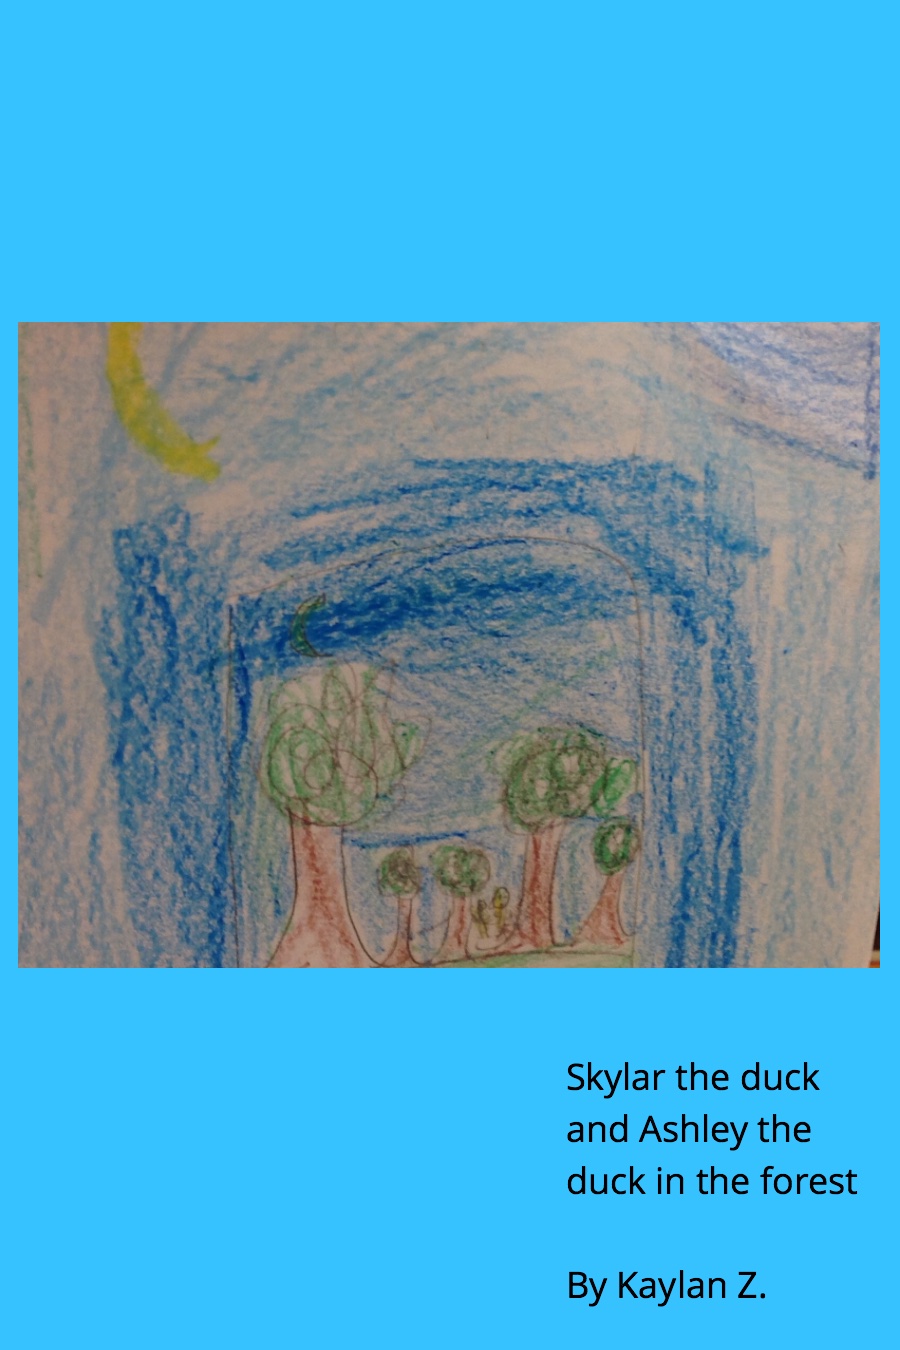 Skylar the Duck and Ashley the Duck in the Forest by Kaylan Z